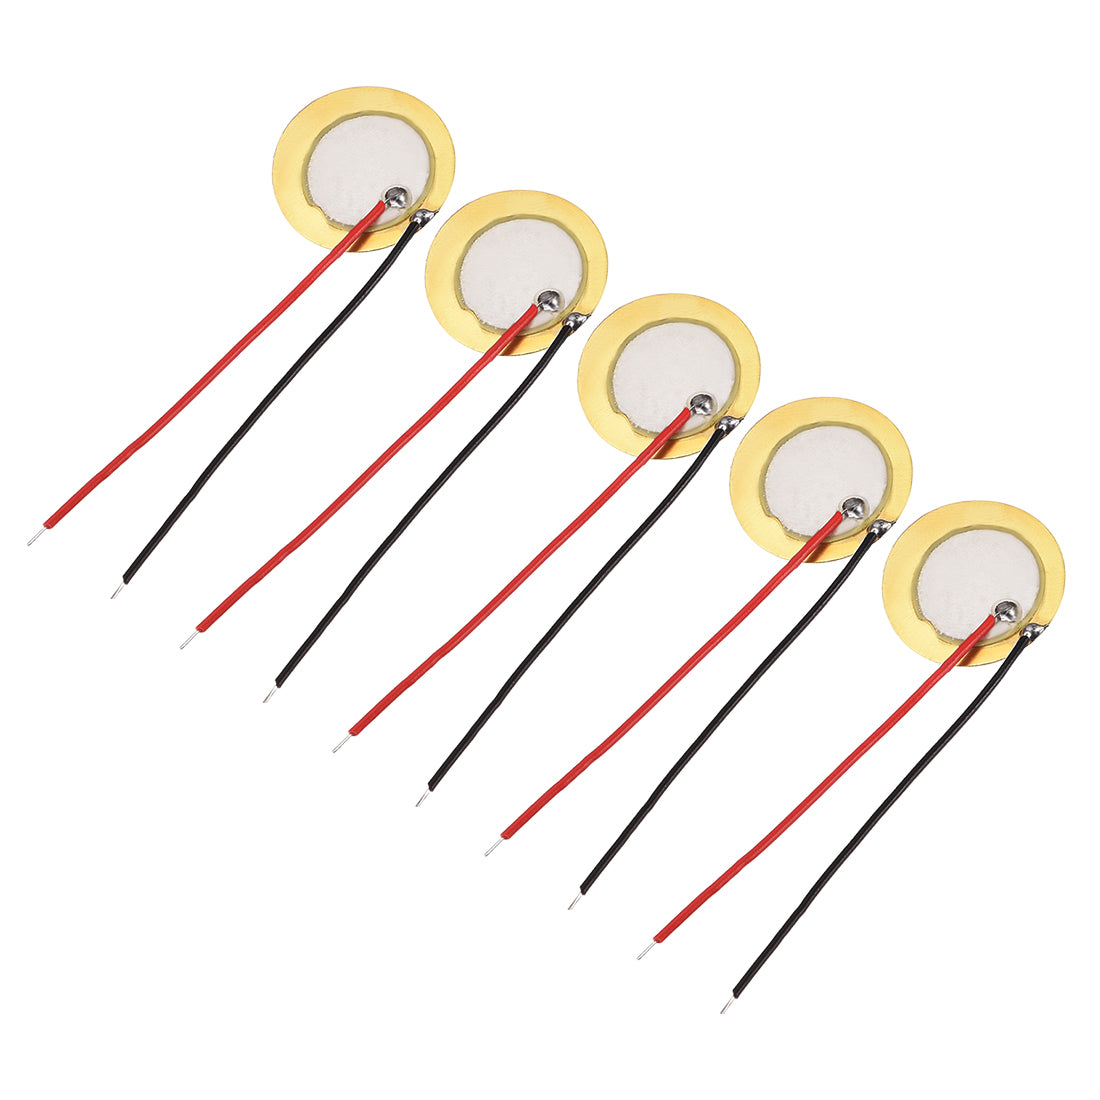 uxcell Uxcell 5 Pcs Piezo Discs 20mm Acoustic Pickup Transducer Prewired Microphone Trigger Drum Guitar